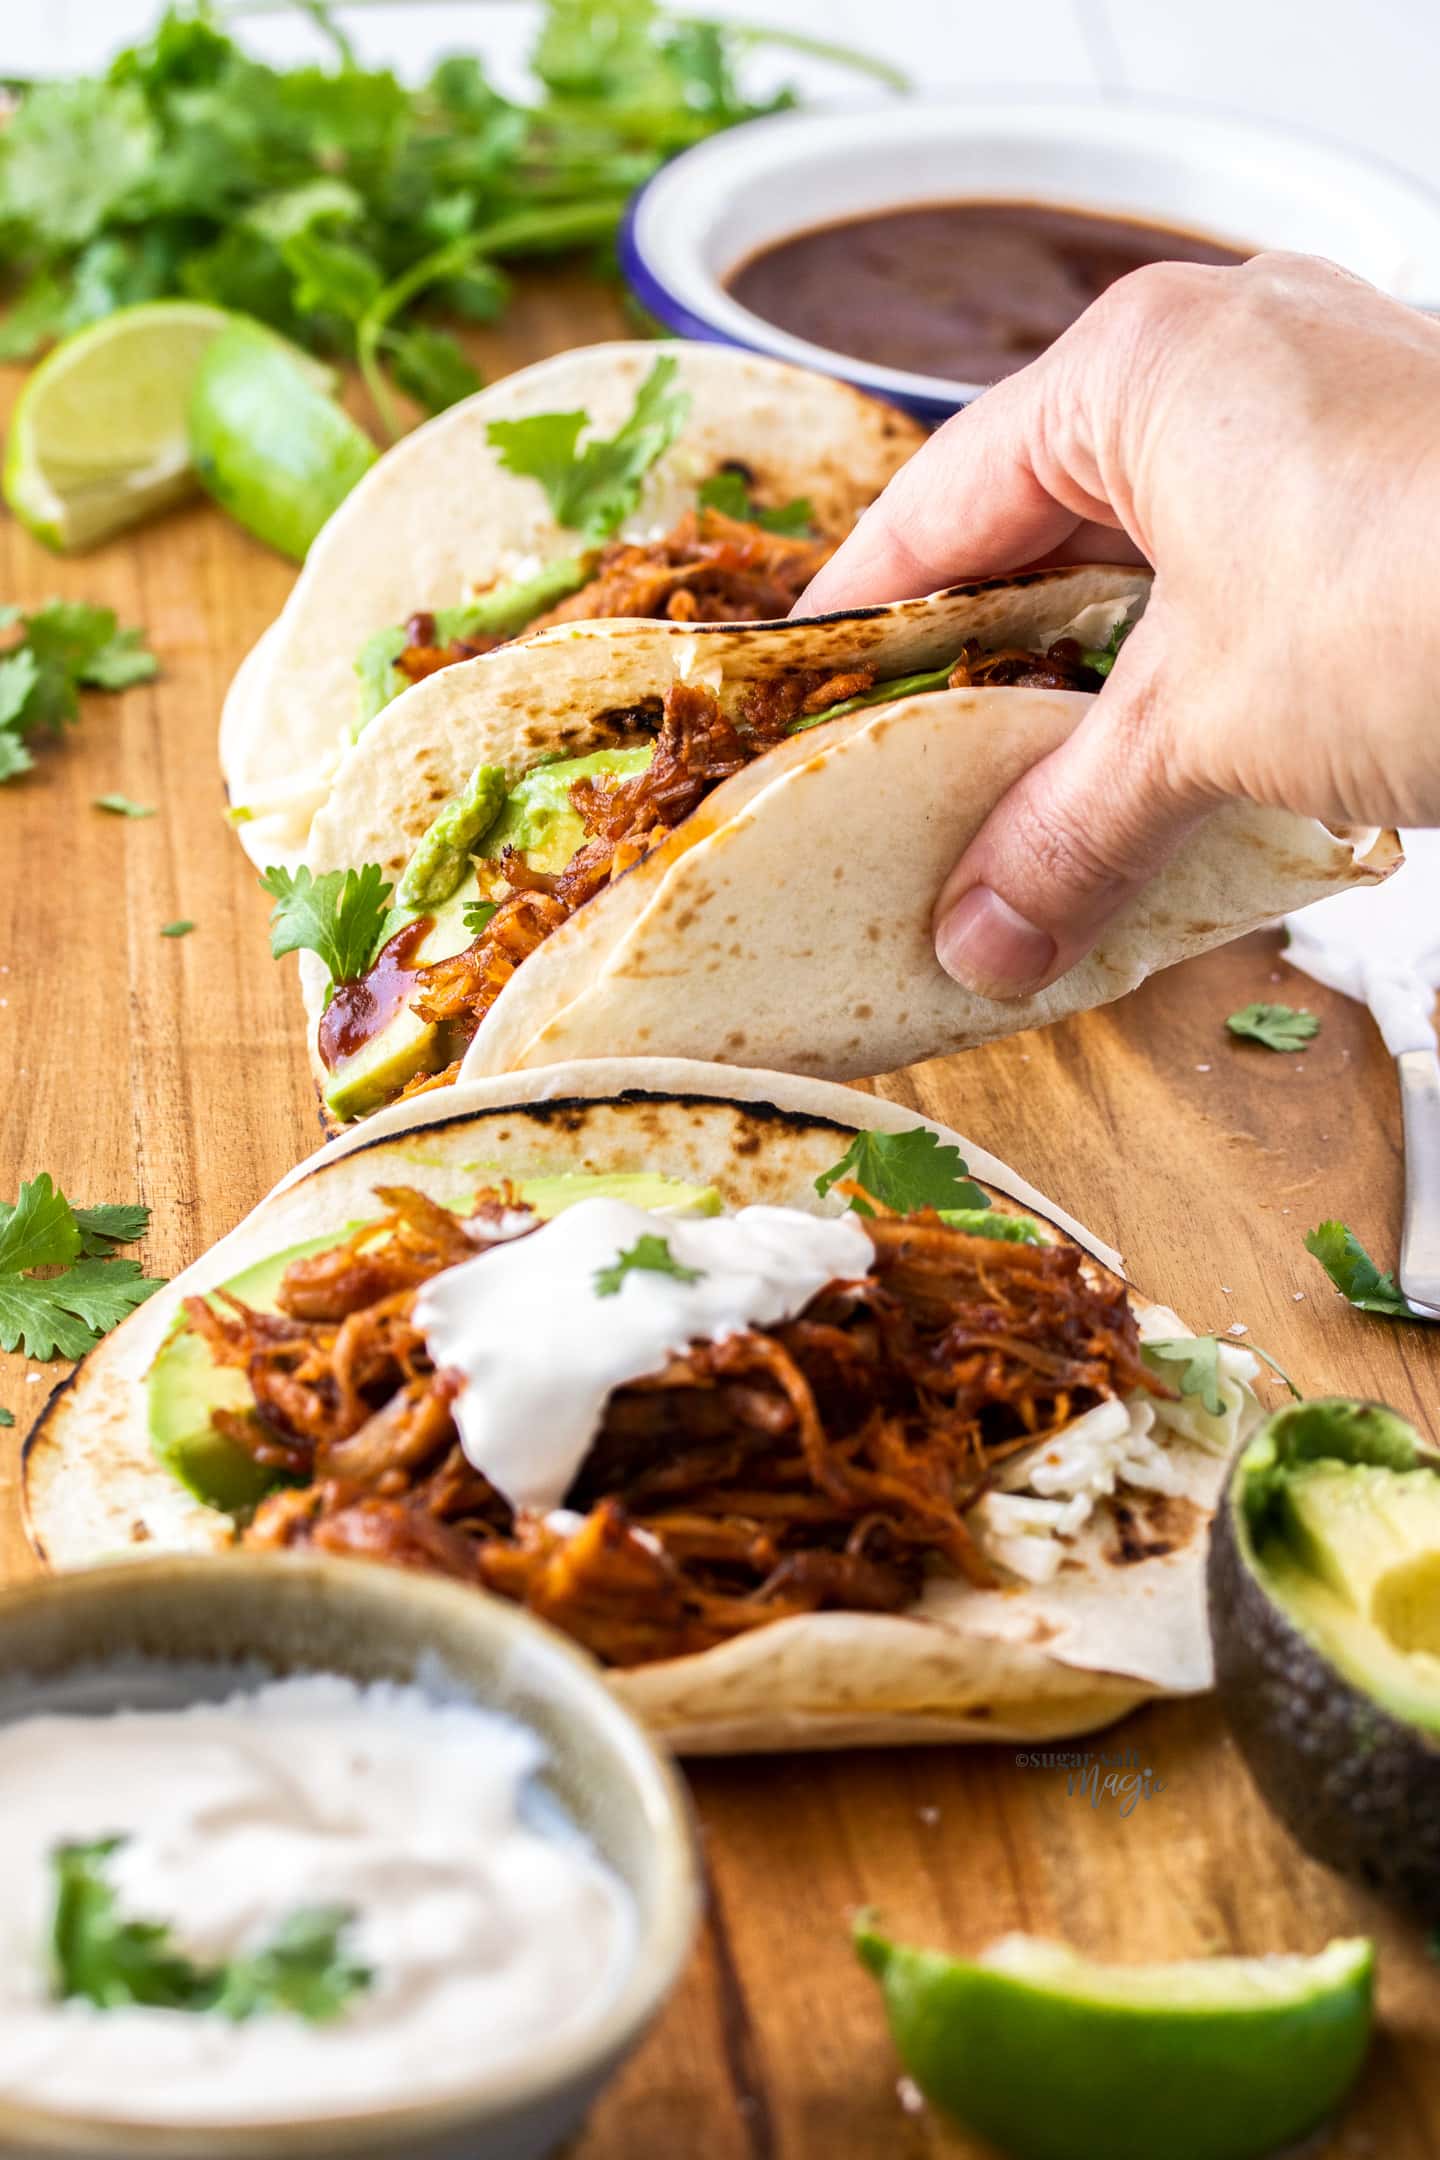 A hand reaching in to pick up a pulled pork taco.